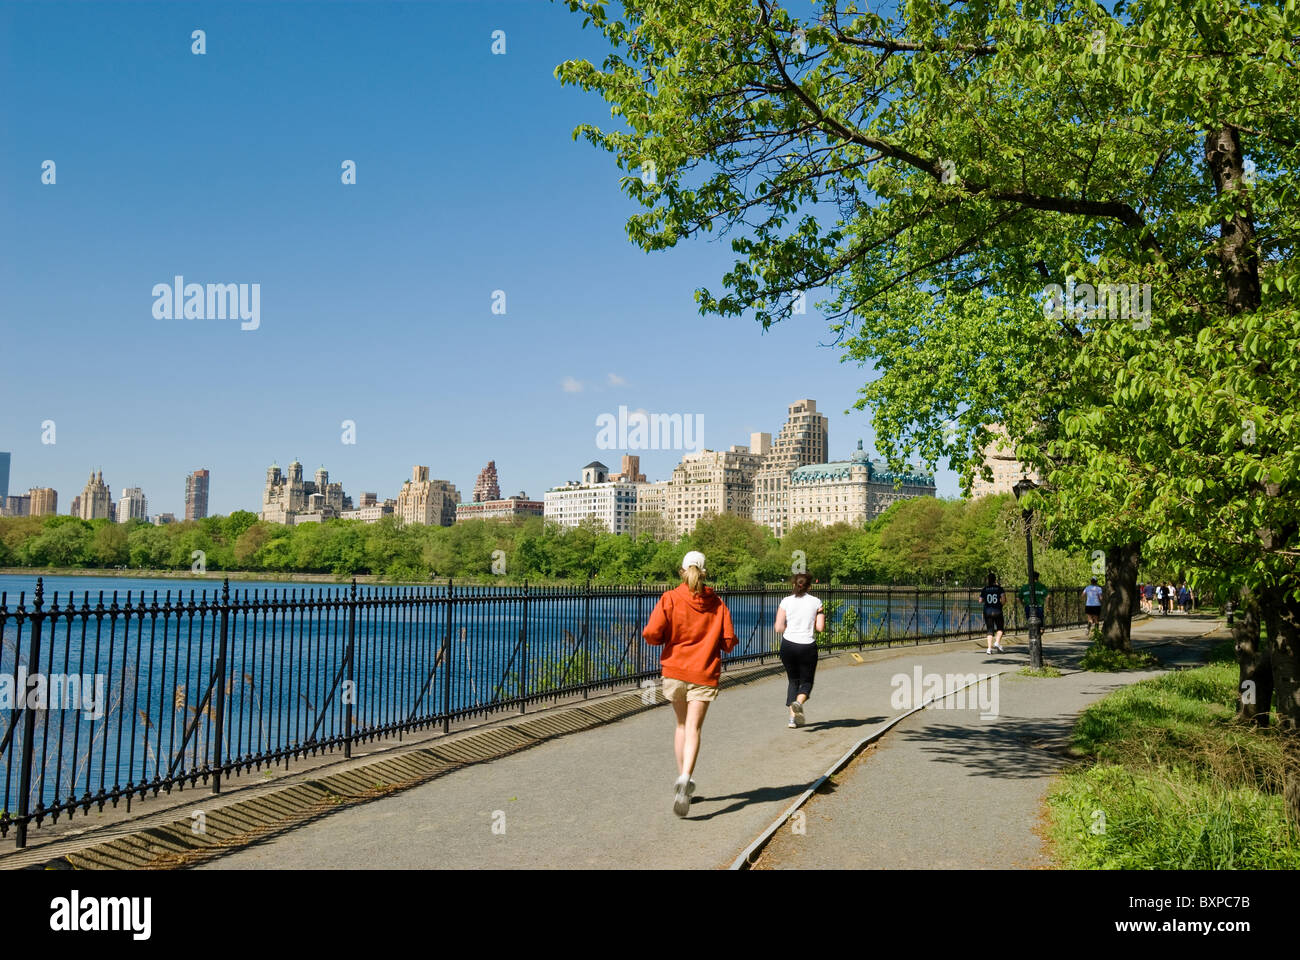 The Reservoir jogging track, with a view of the Central Park West ...